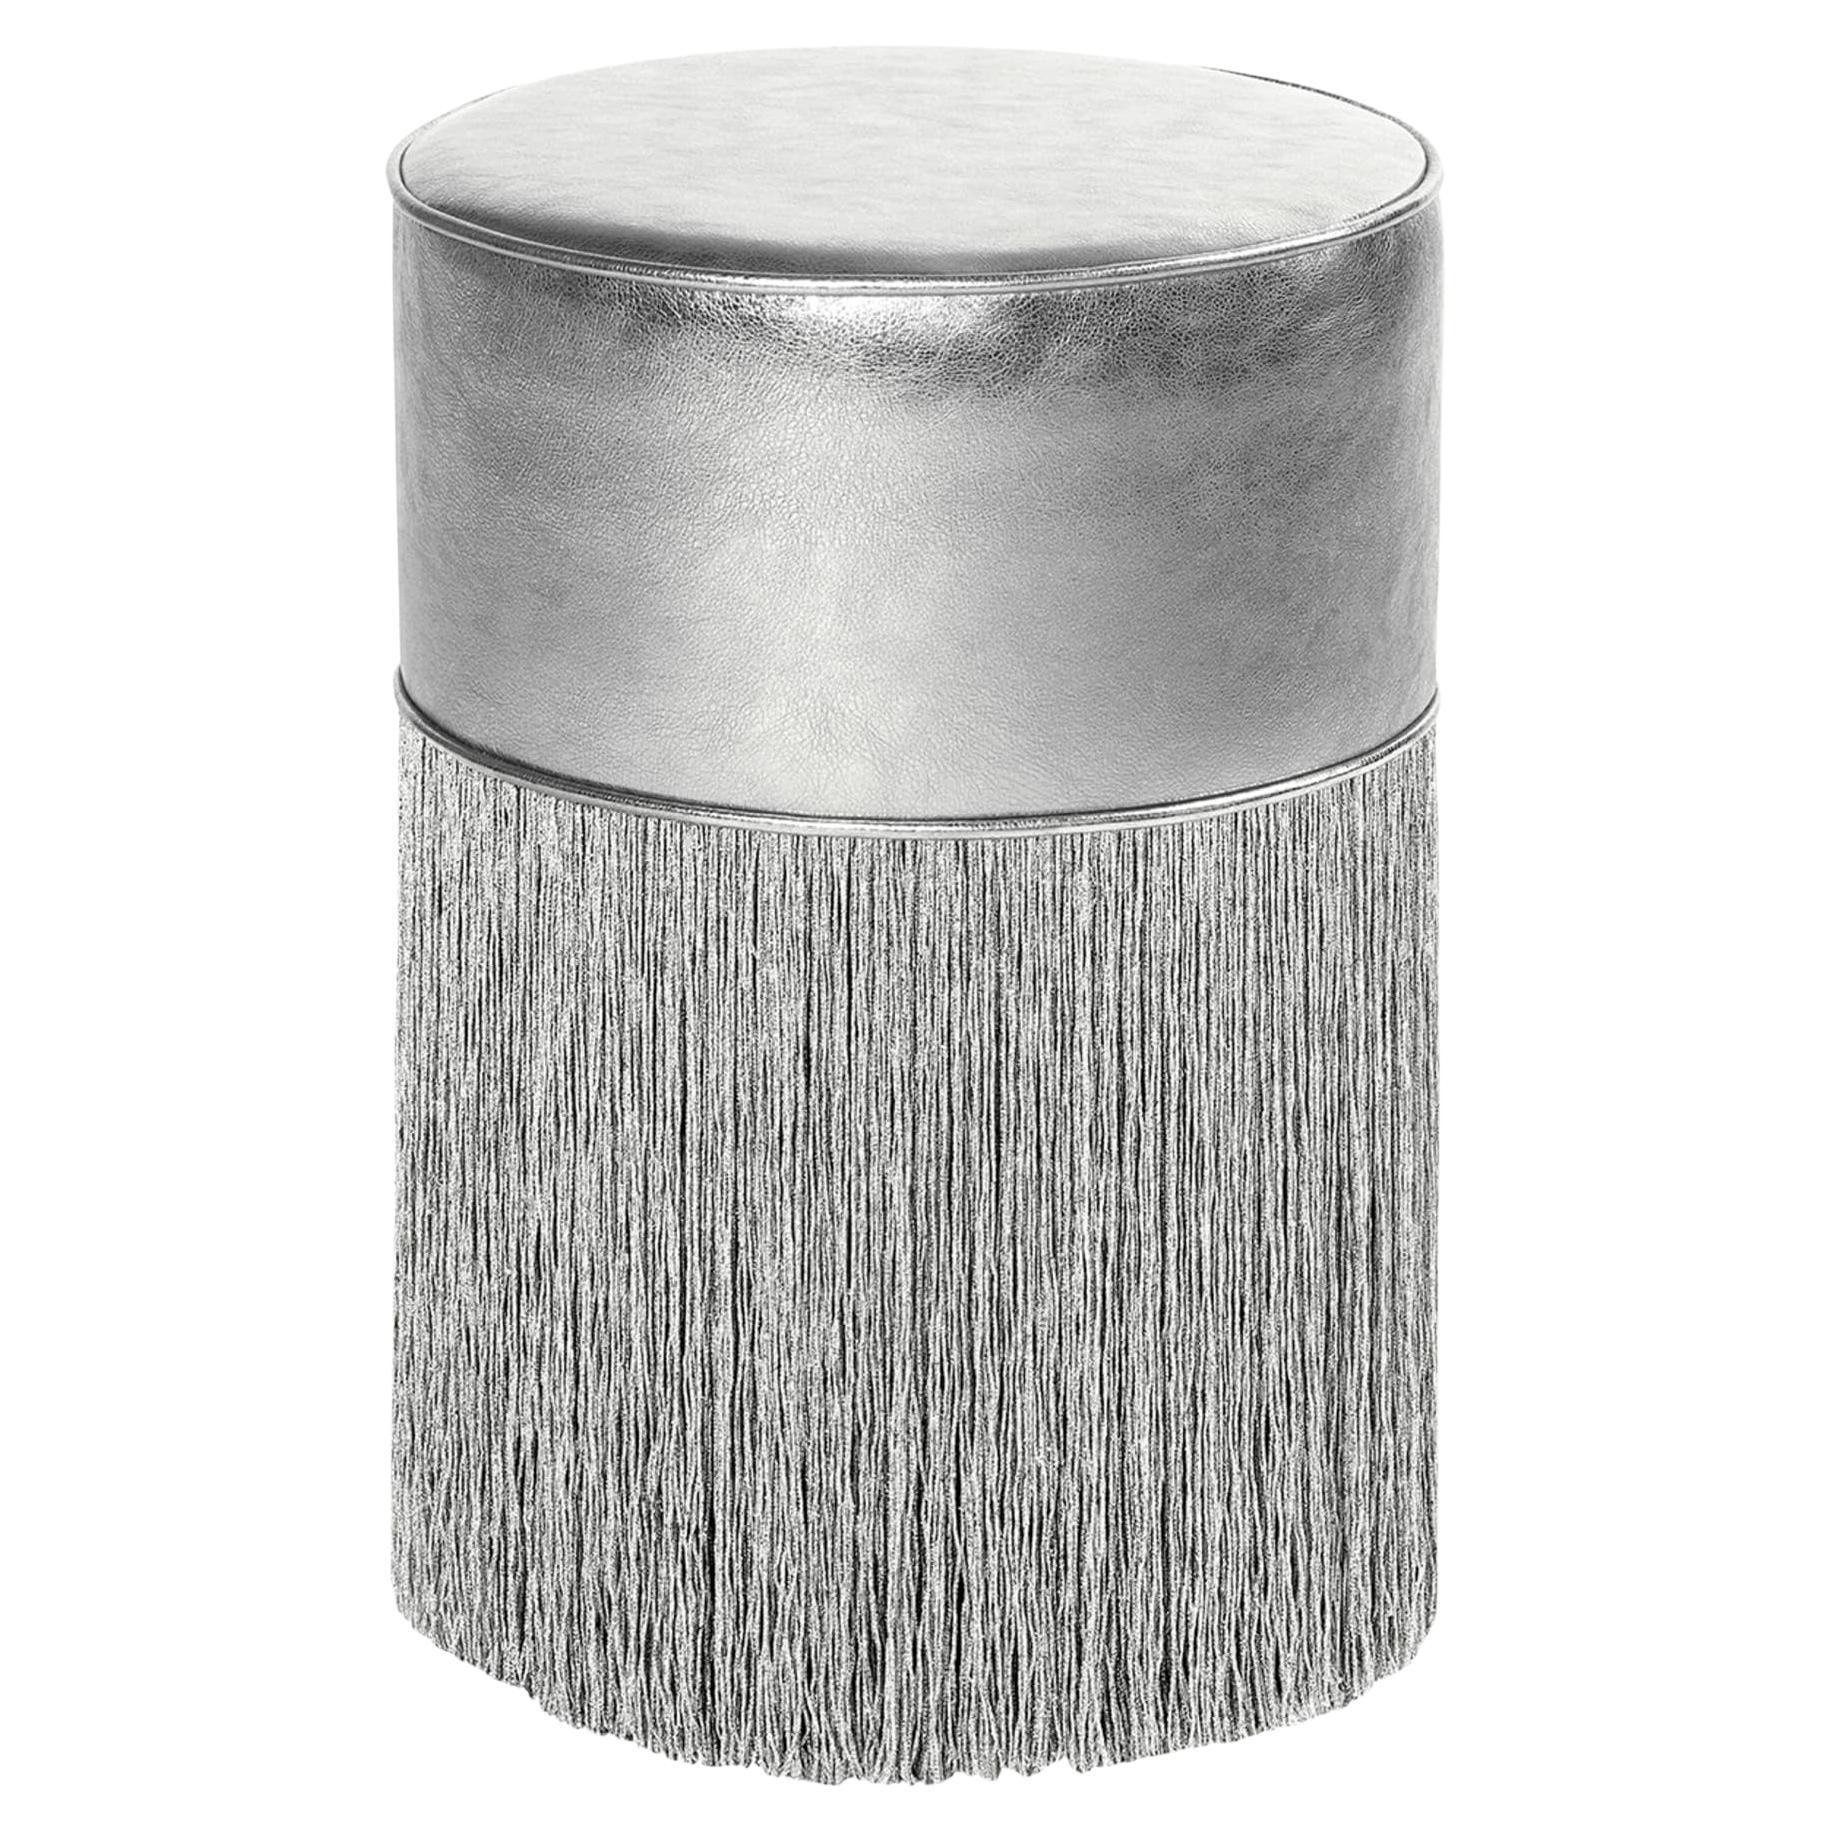 Gleaming Silver Metallic Leather Pouf by Lorenza Bozzoli For Sale